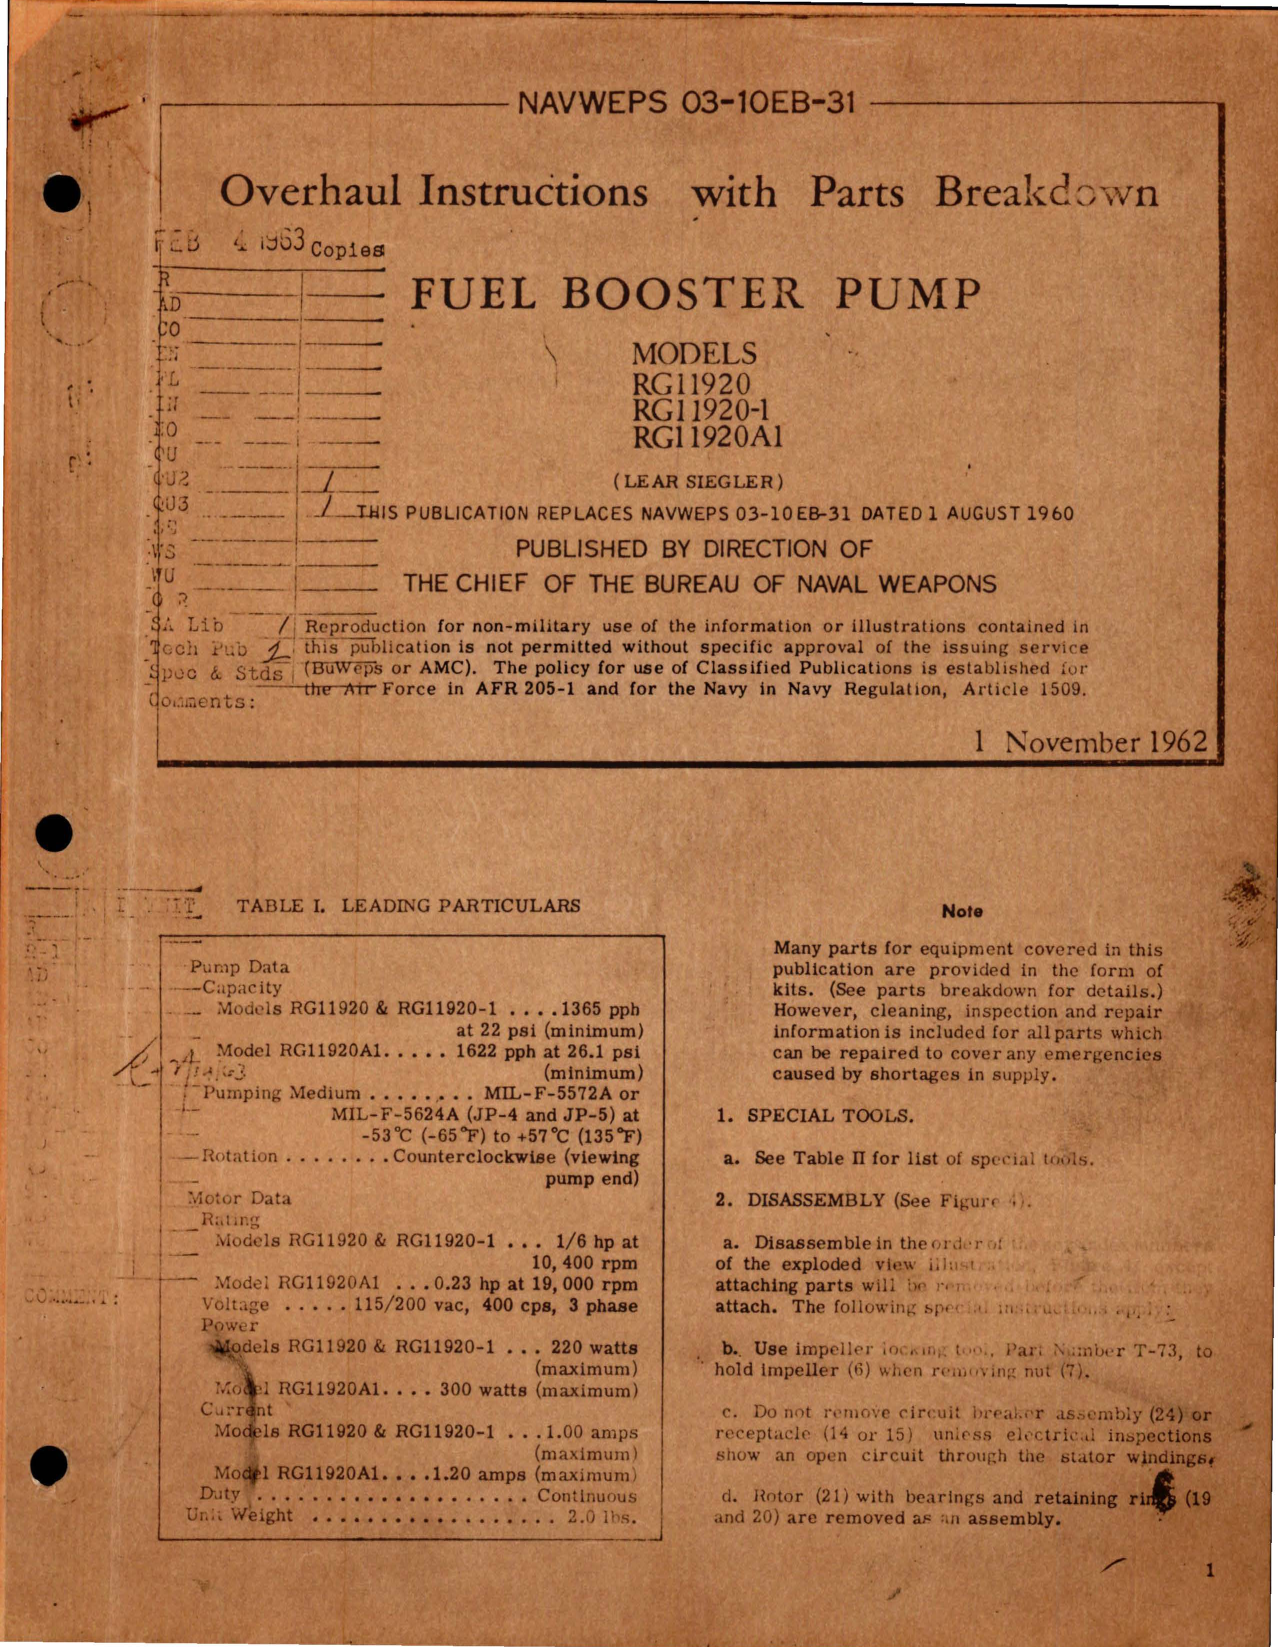 Sample page 1 from AirCorps Library document: Overhaul Instructions with Parts for Fuel Booster Pump - Models RG11920, RG11920-1, RG11920A1